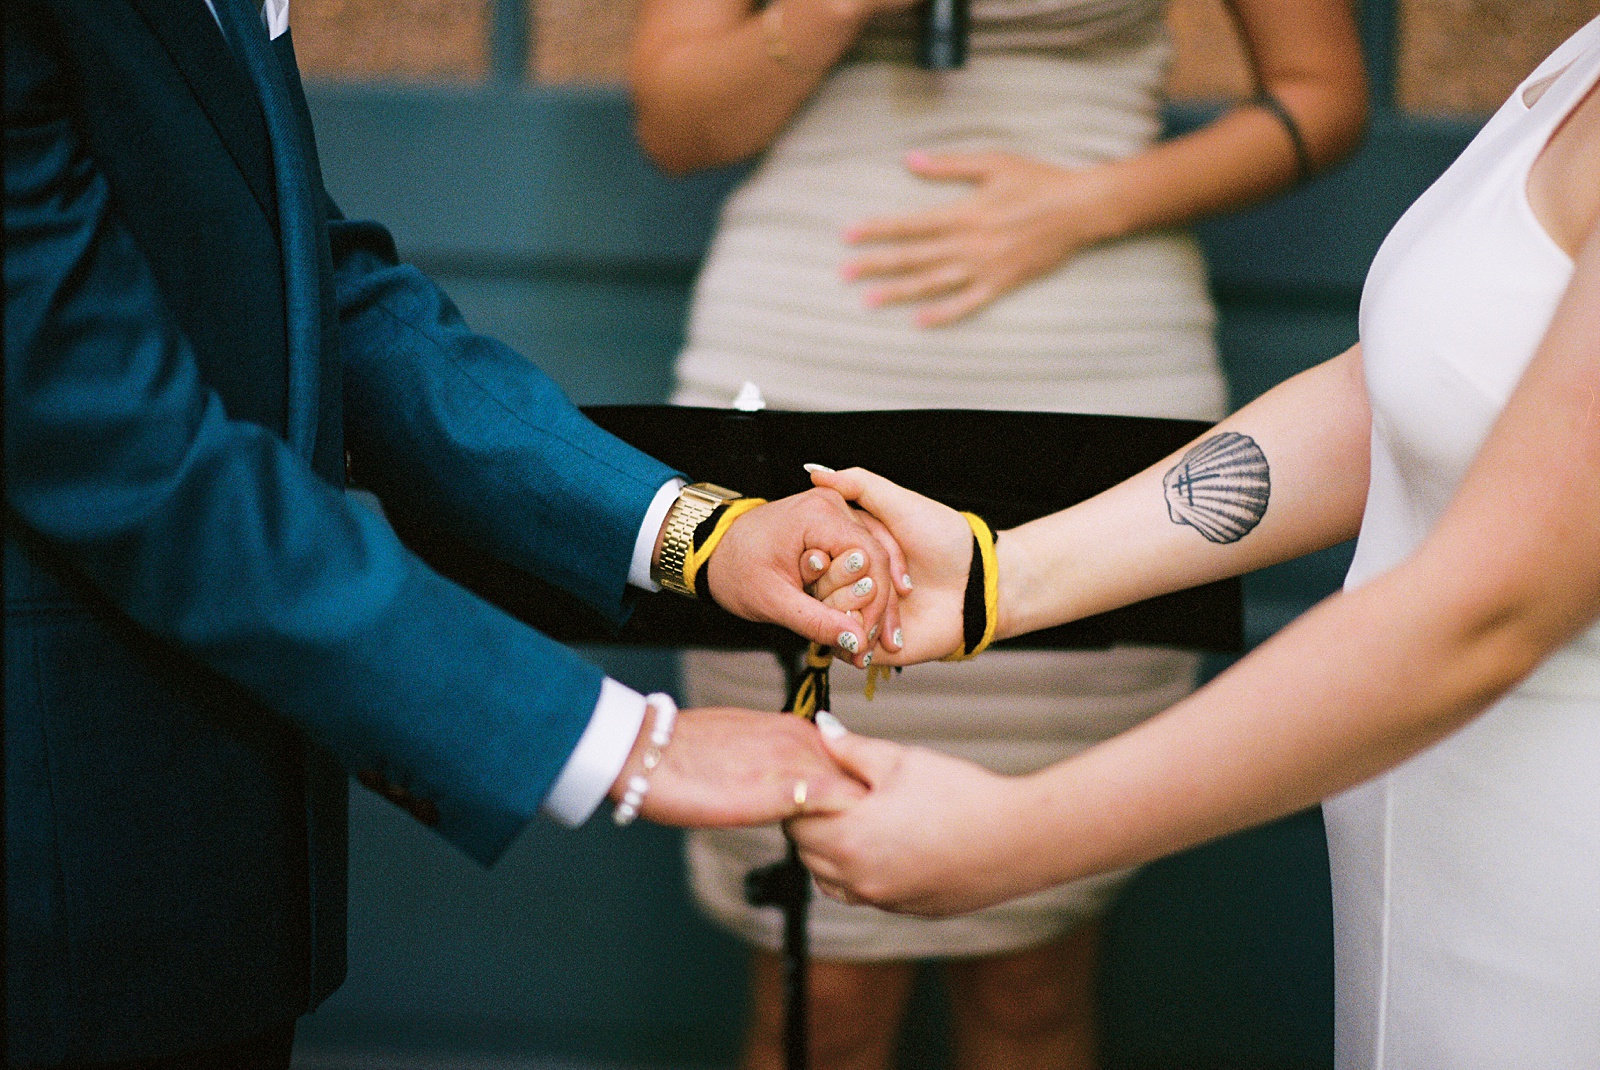 A couple holds hands during a handfasting at a Philadelphia wedding.